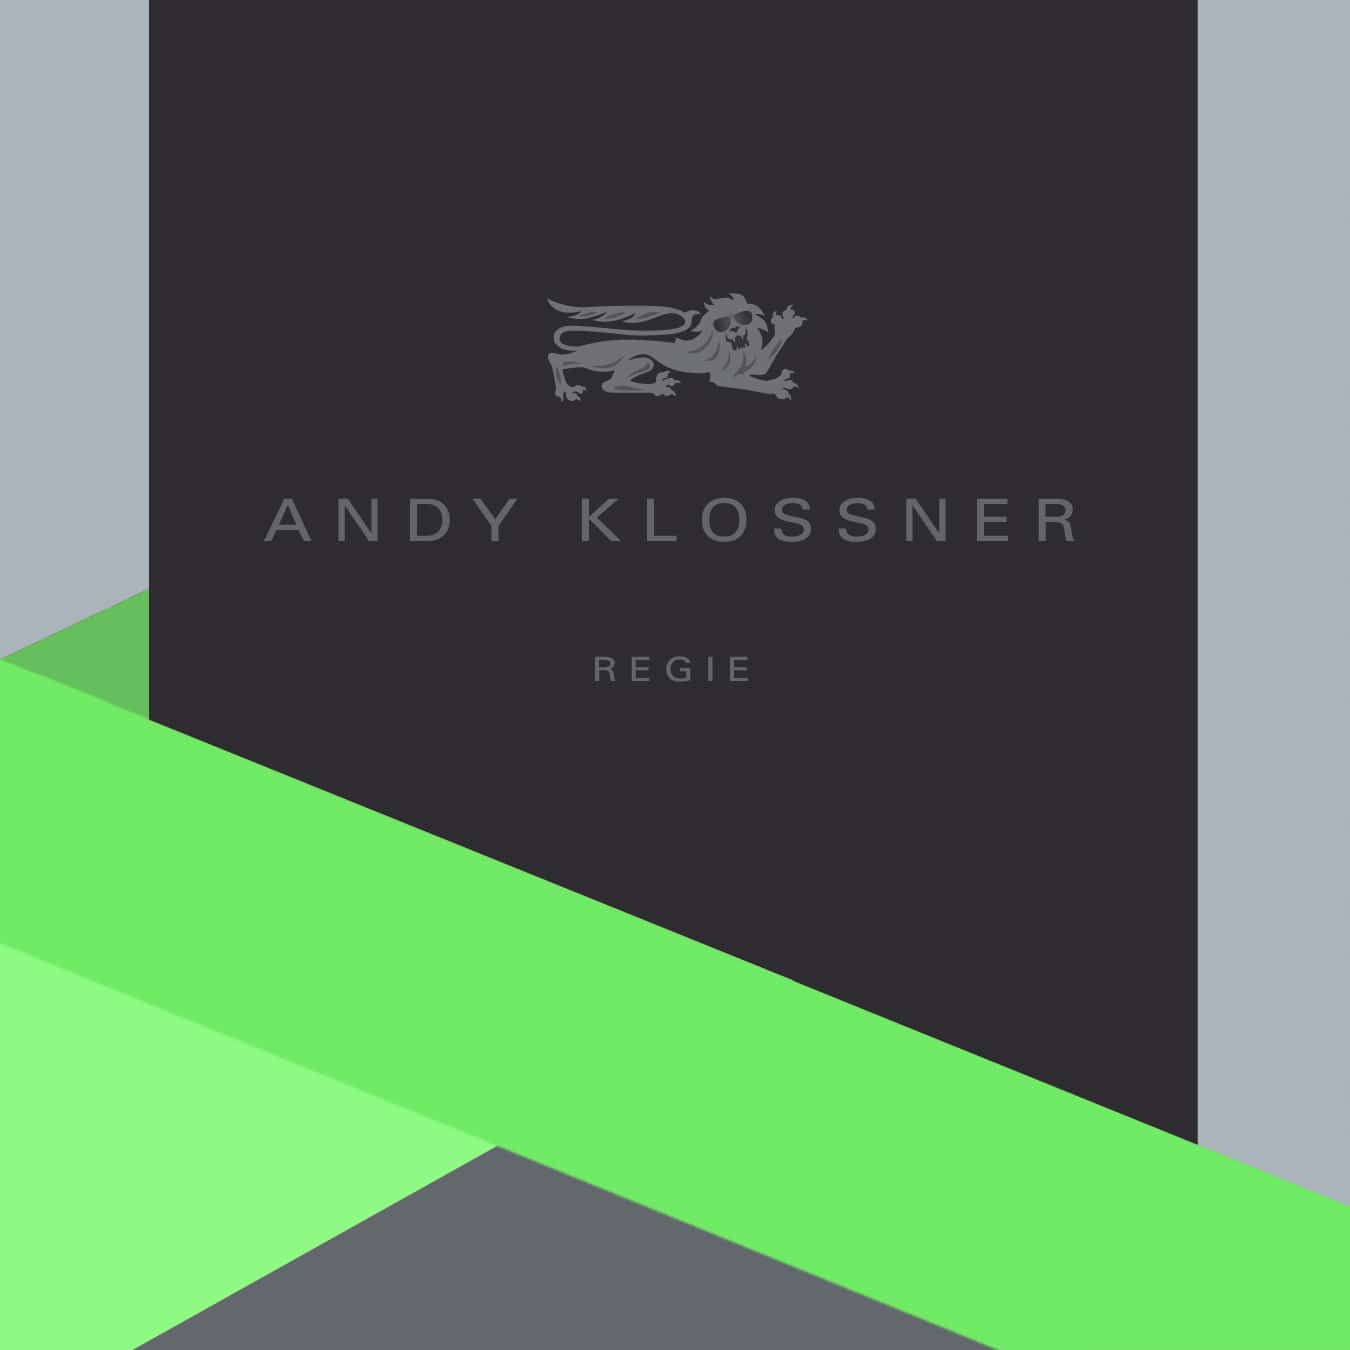 //www.andyklossner.com/wp-content/uploads/2019/02/About1.jpg